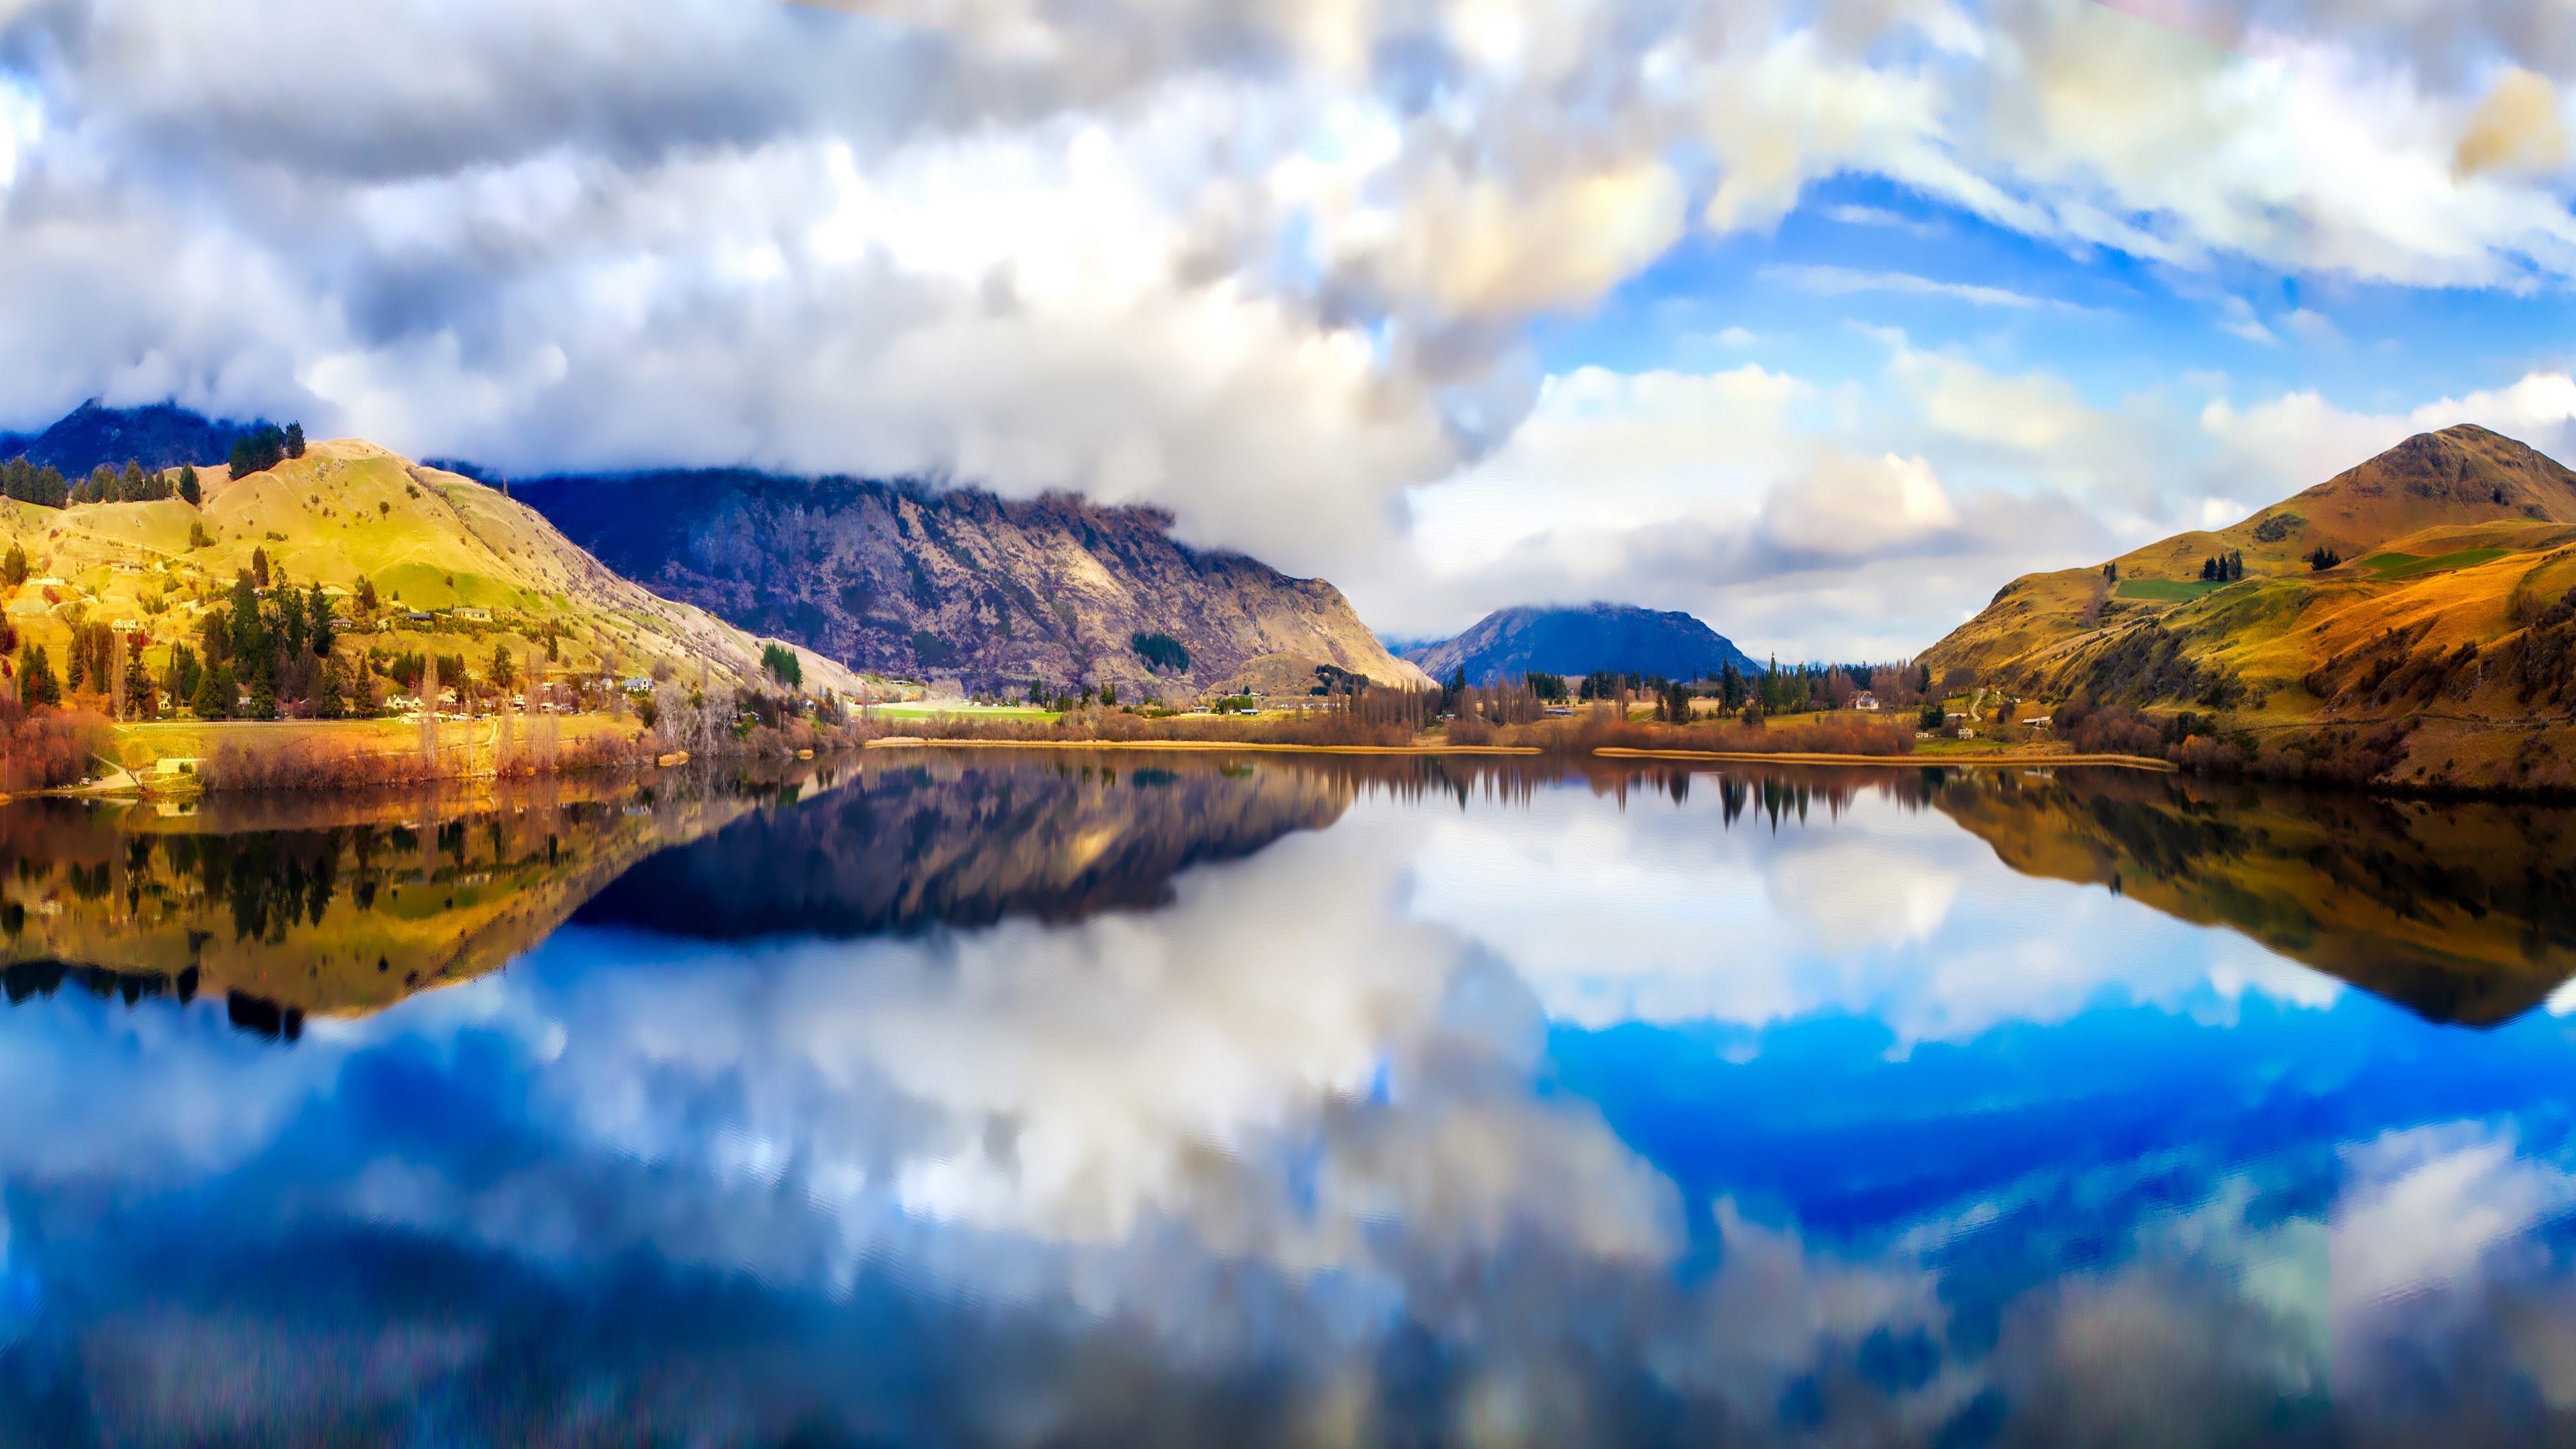 General 3840x2160 landscape 4K New Zealand nature water reflection mountains clouds sky